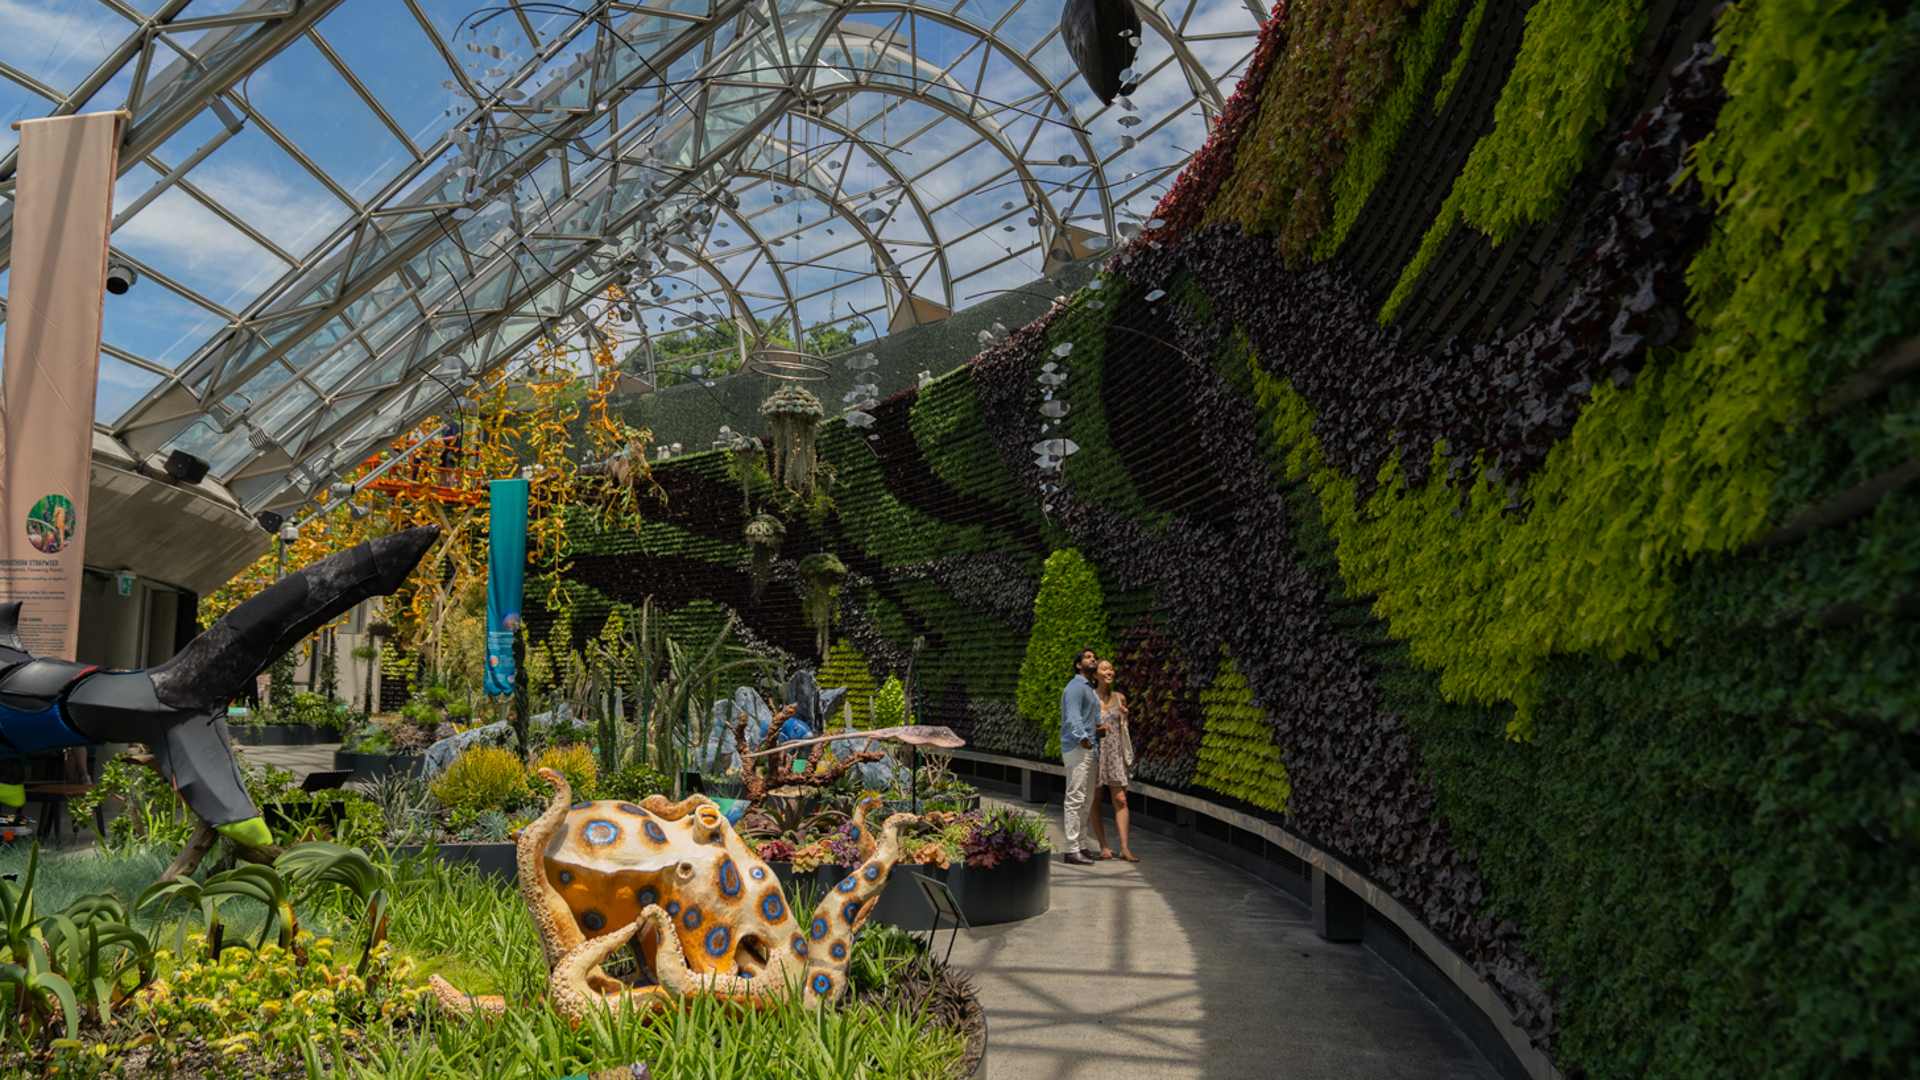 Plant and Sculpture Exhibition 'Inside the Tide' Has Taken Over The Calyx at the Royal Botanic Garden